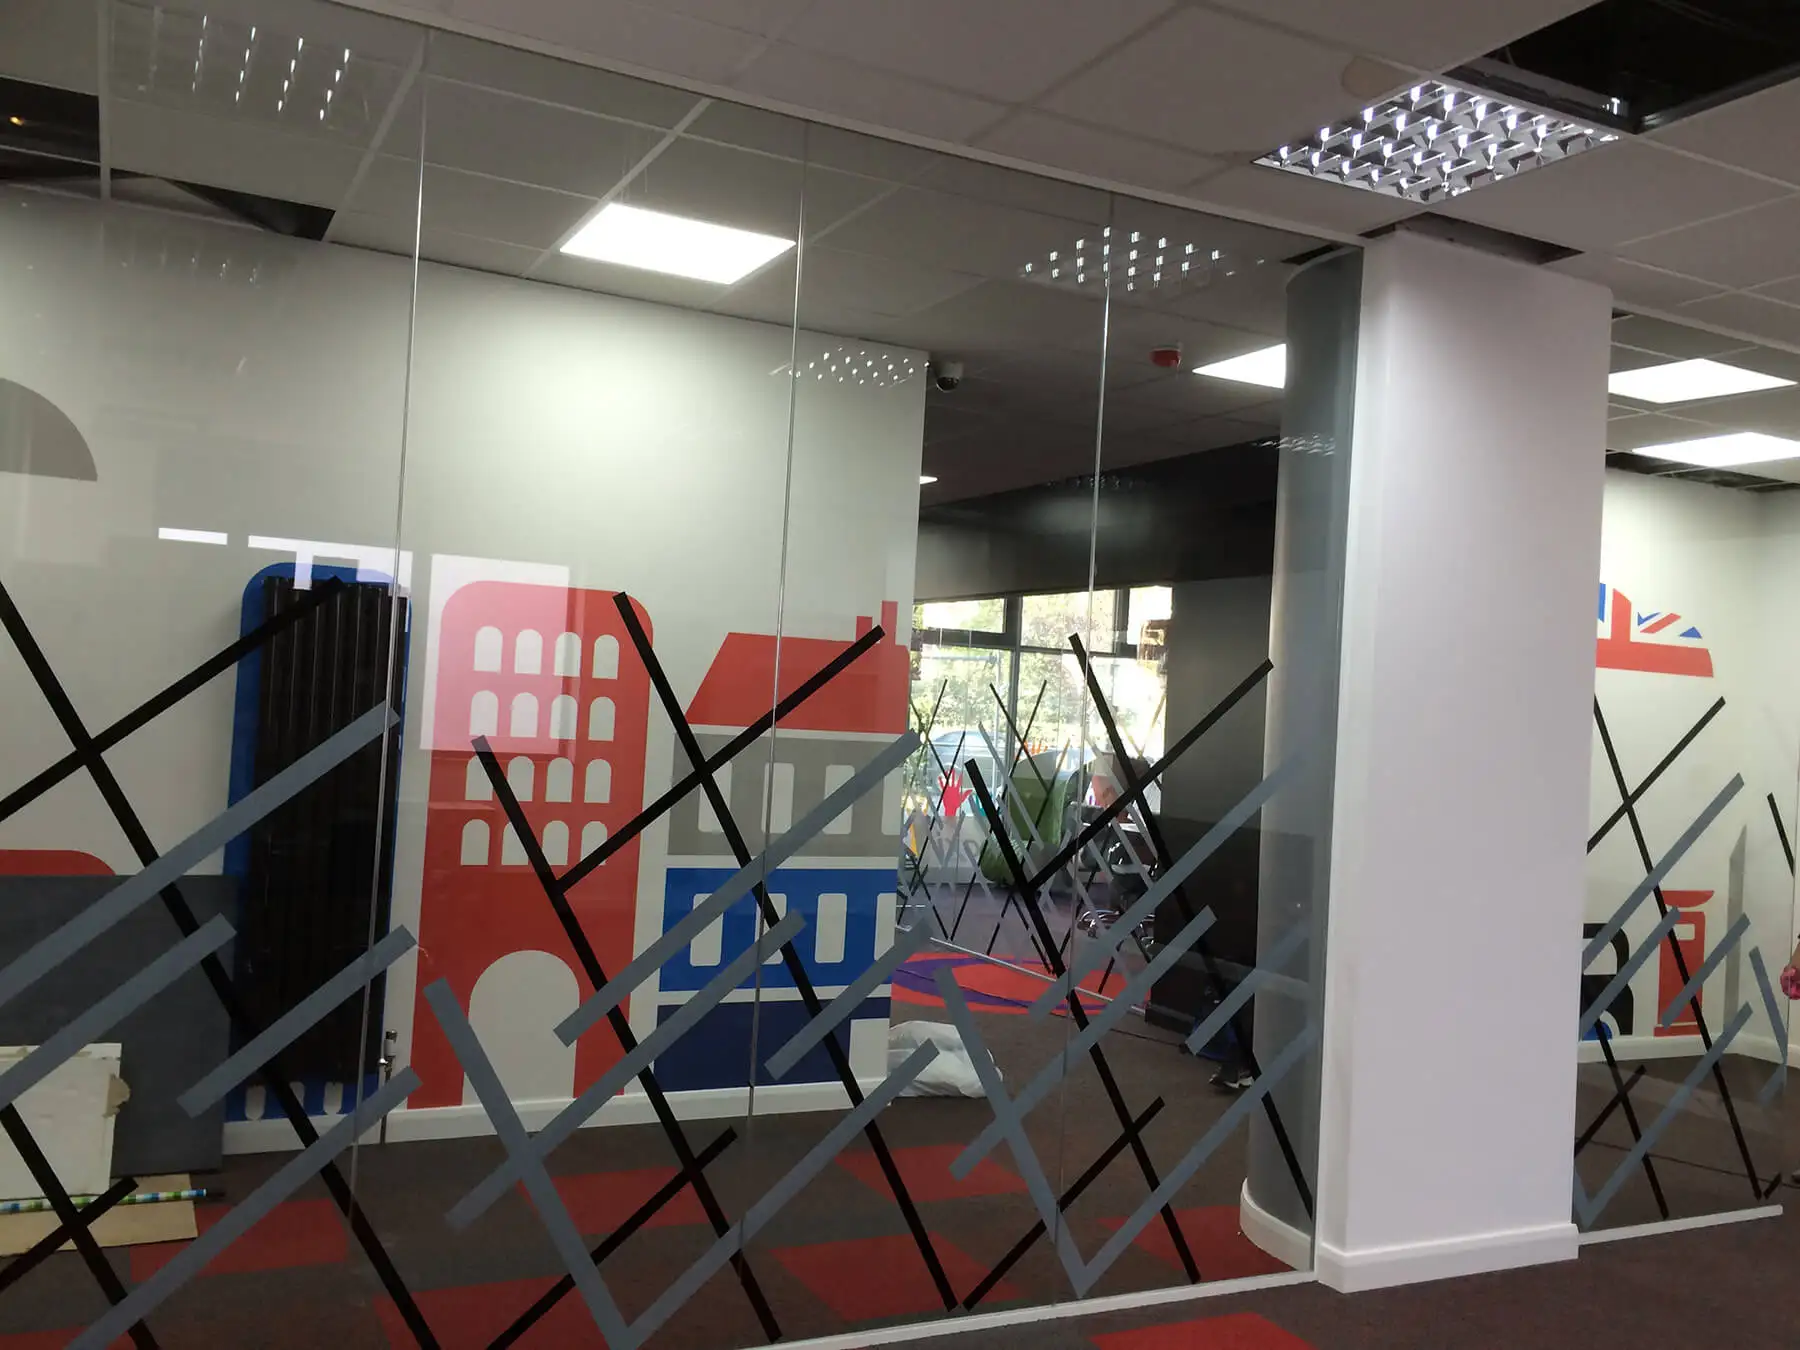 Office space partitioning with designer glass walls